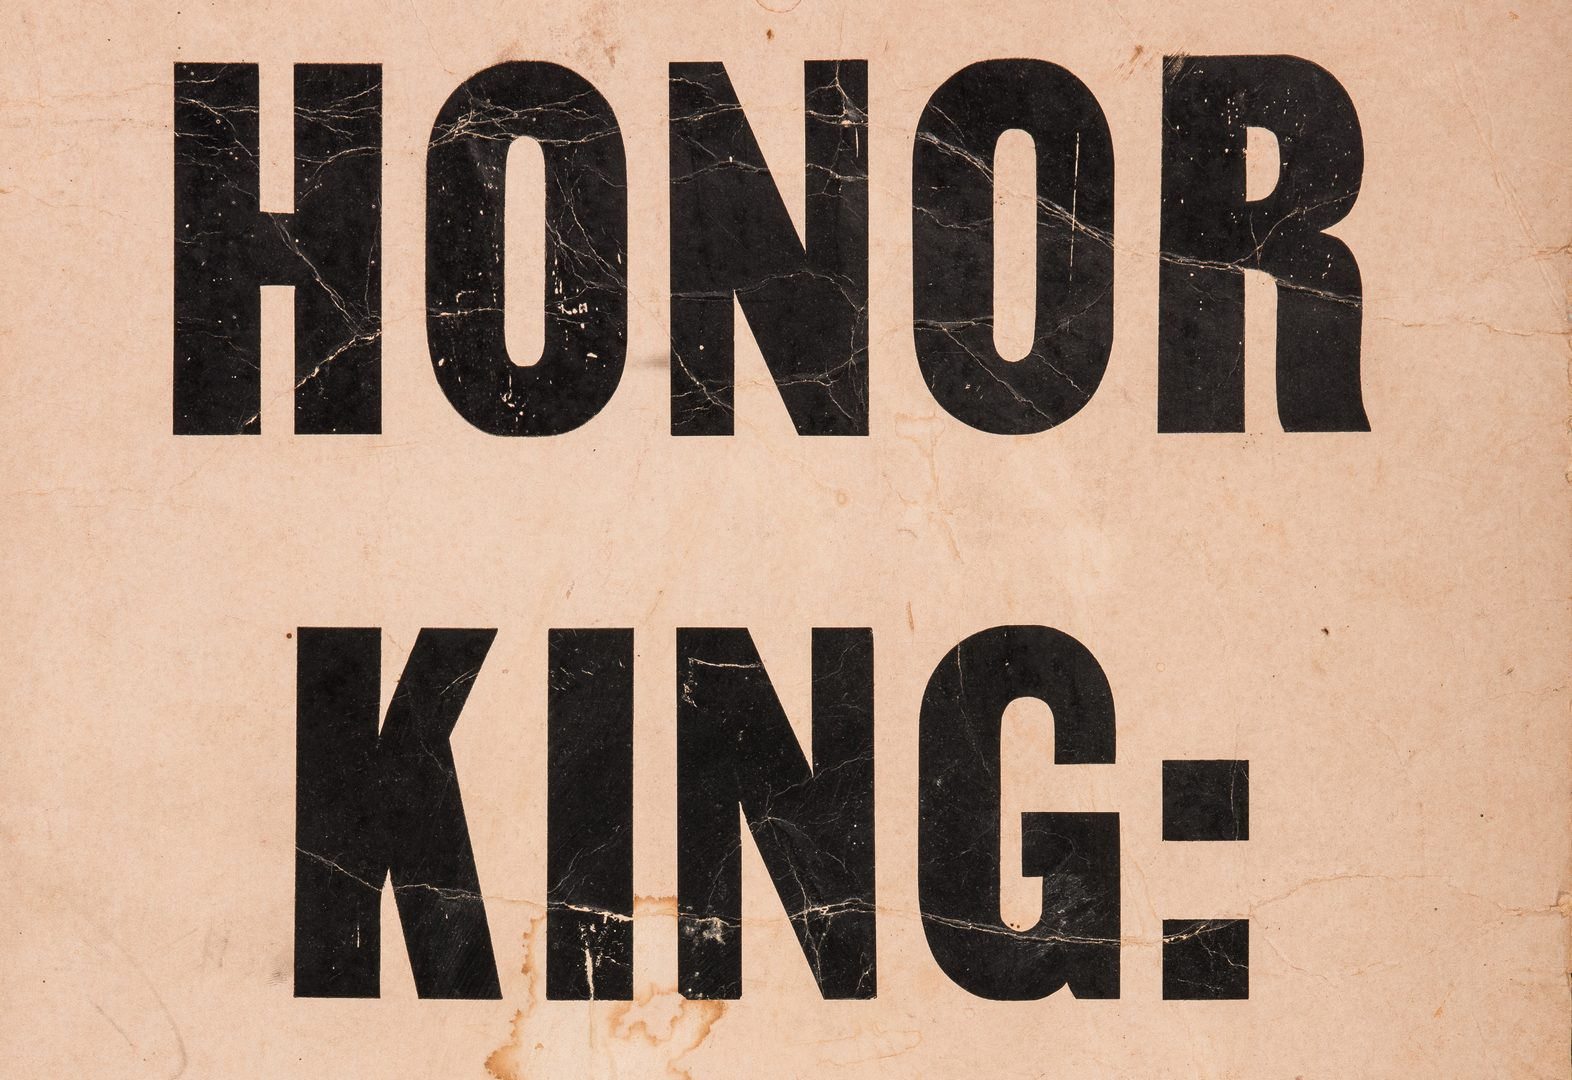 Lot 291: Civil Rights Era Sign: Honor King – End Racism